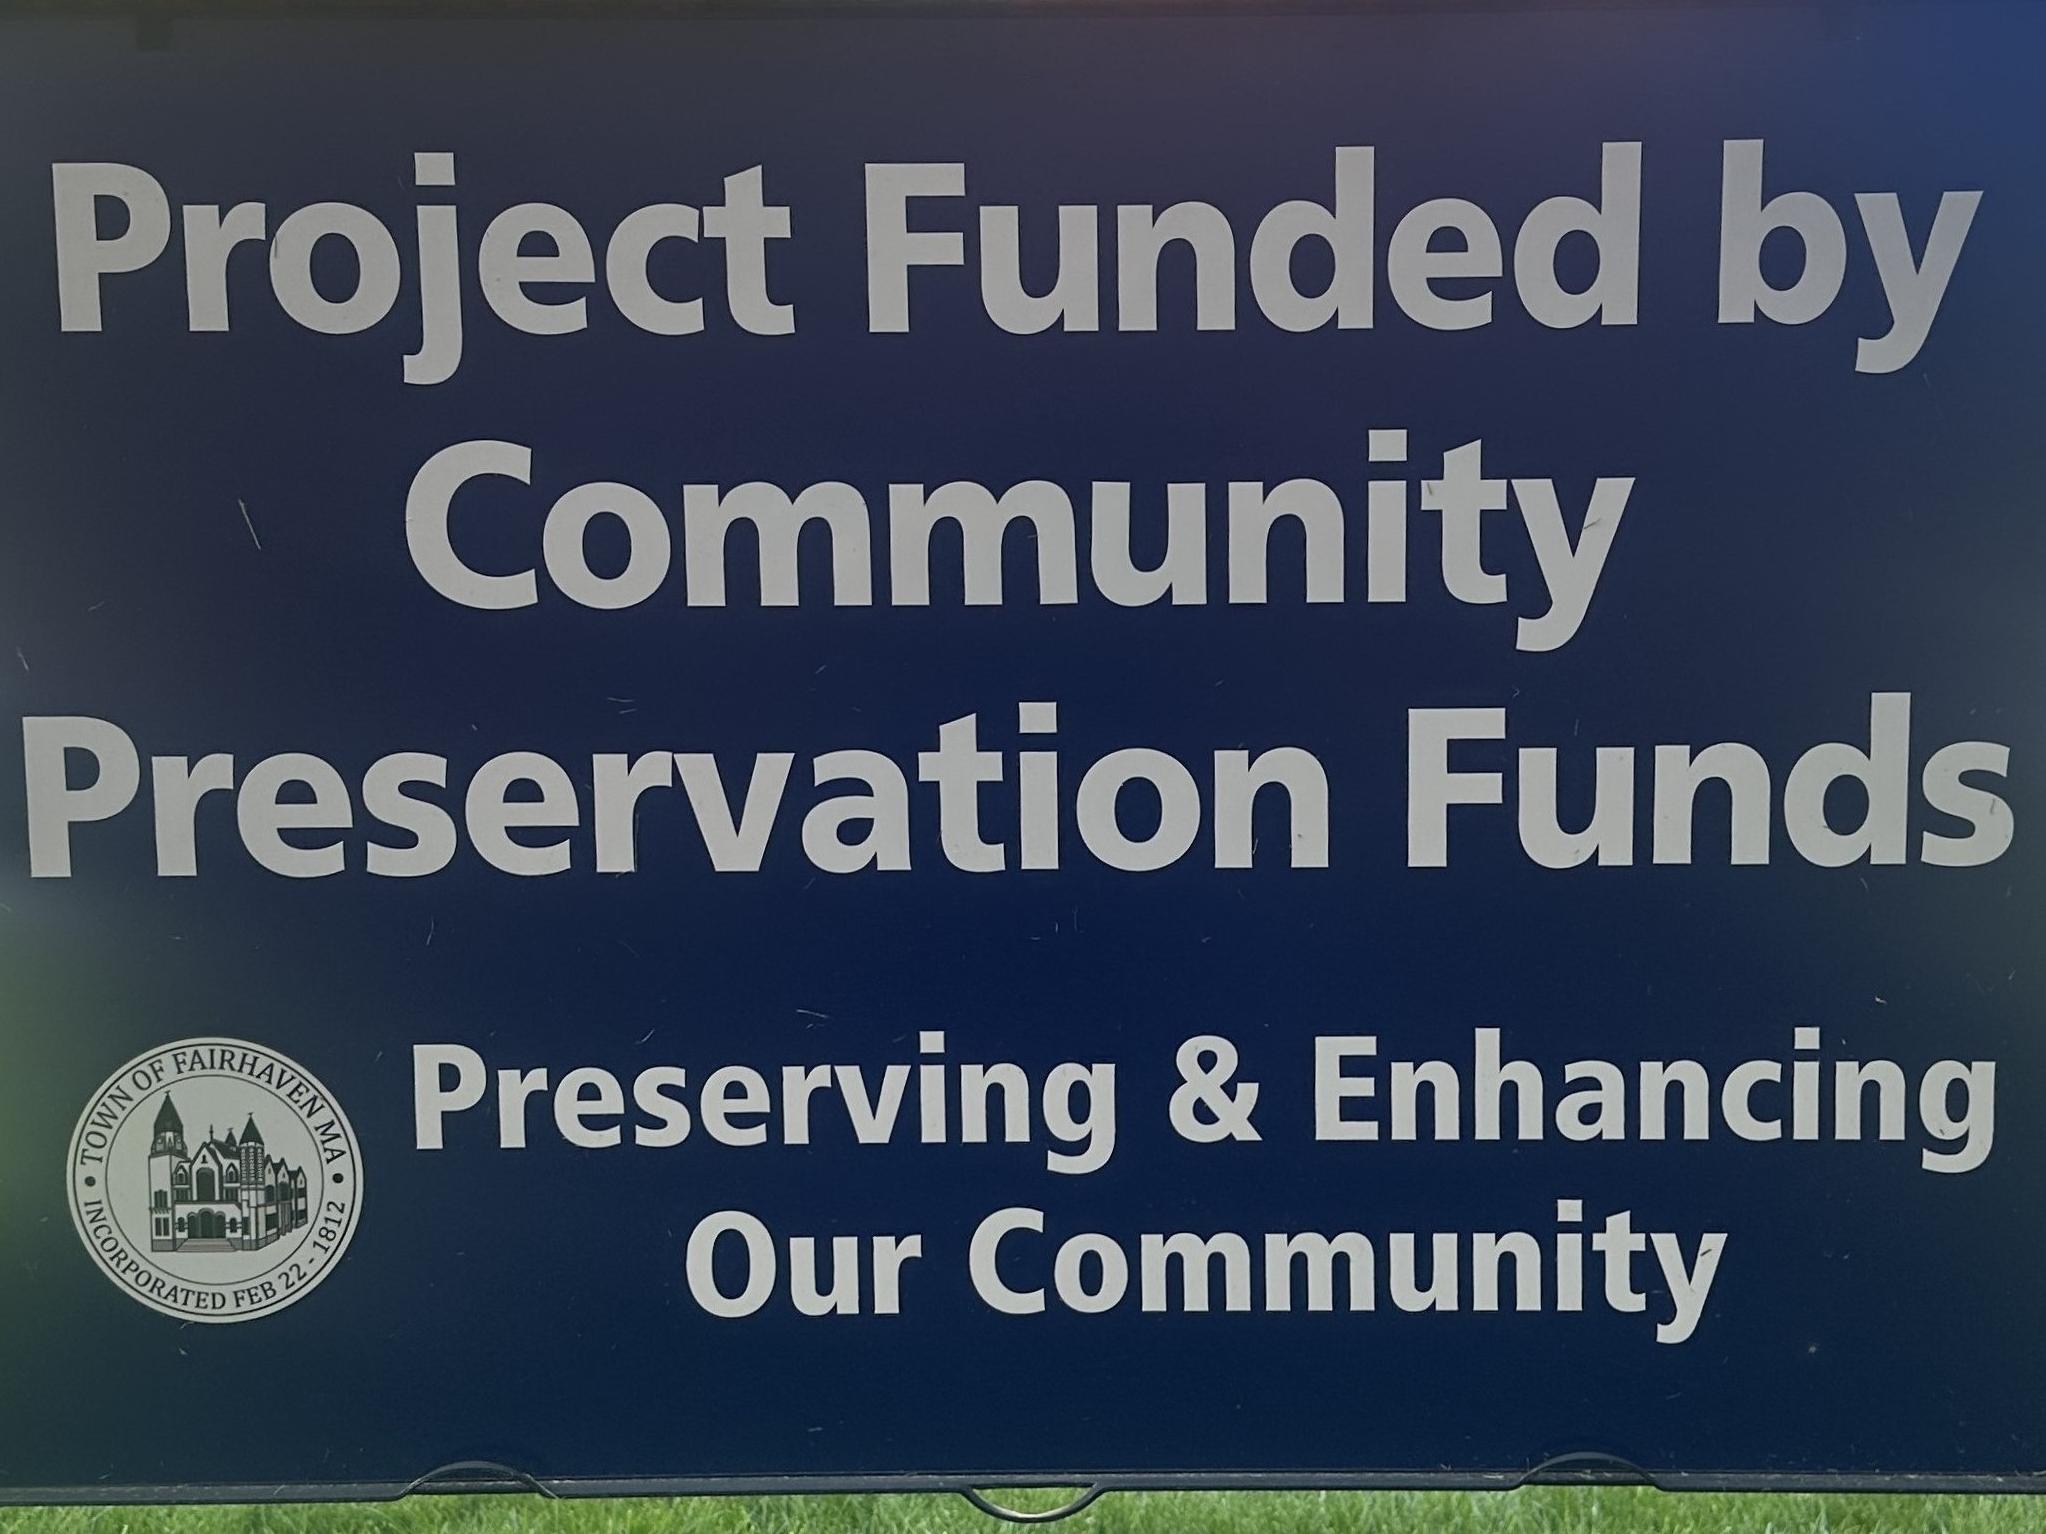 Lawn sign reading Project Funded by Community Preservation Funds. Preserving and Enhancing Our Community